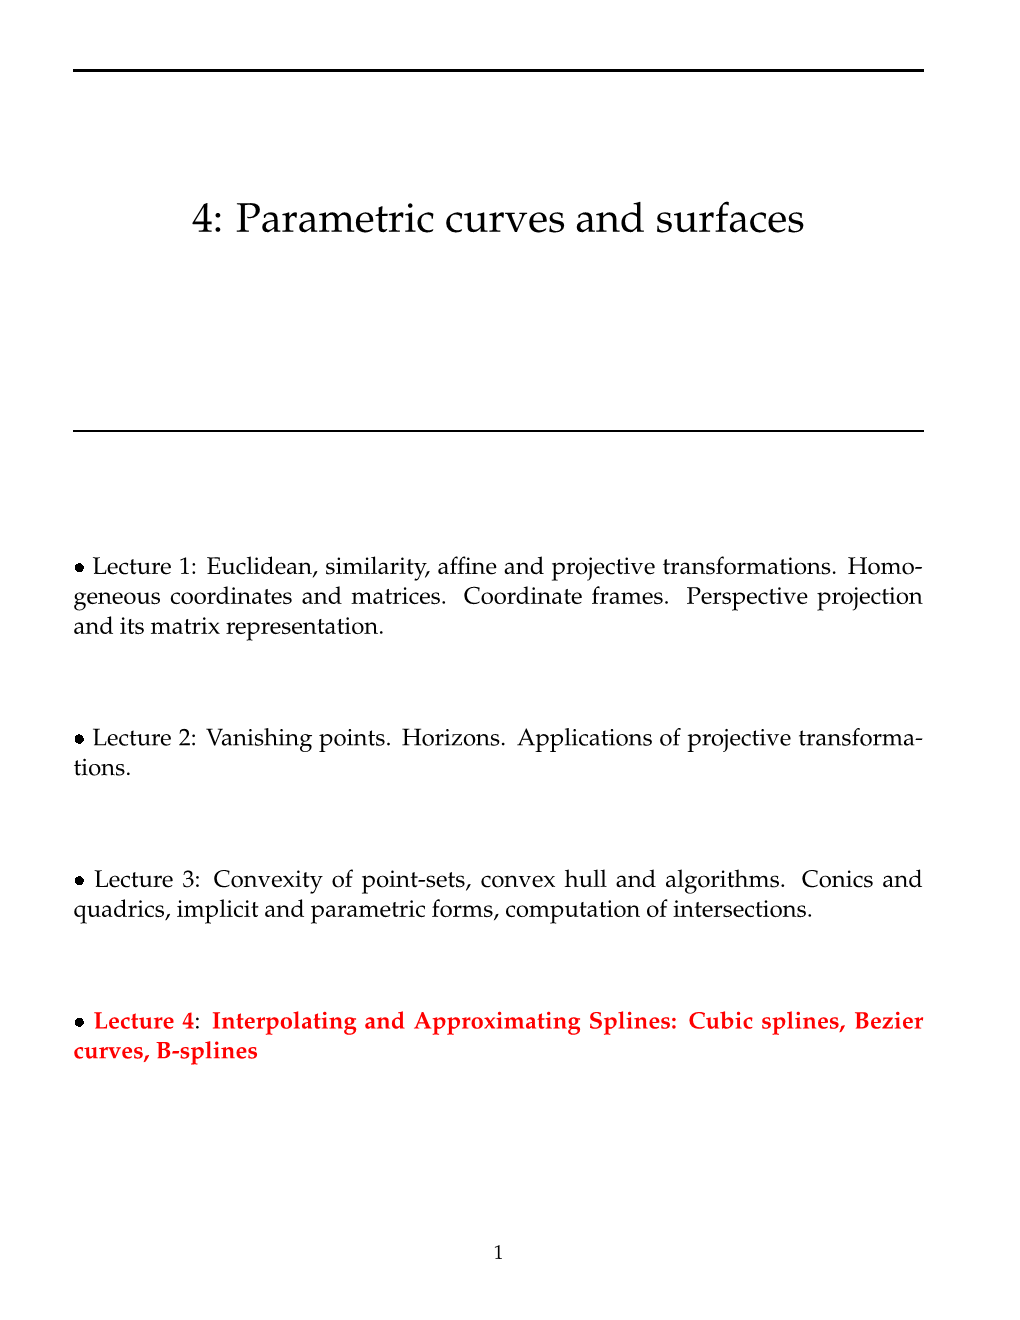 4: Parametric Curves and Surfaces